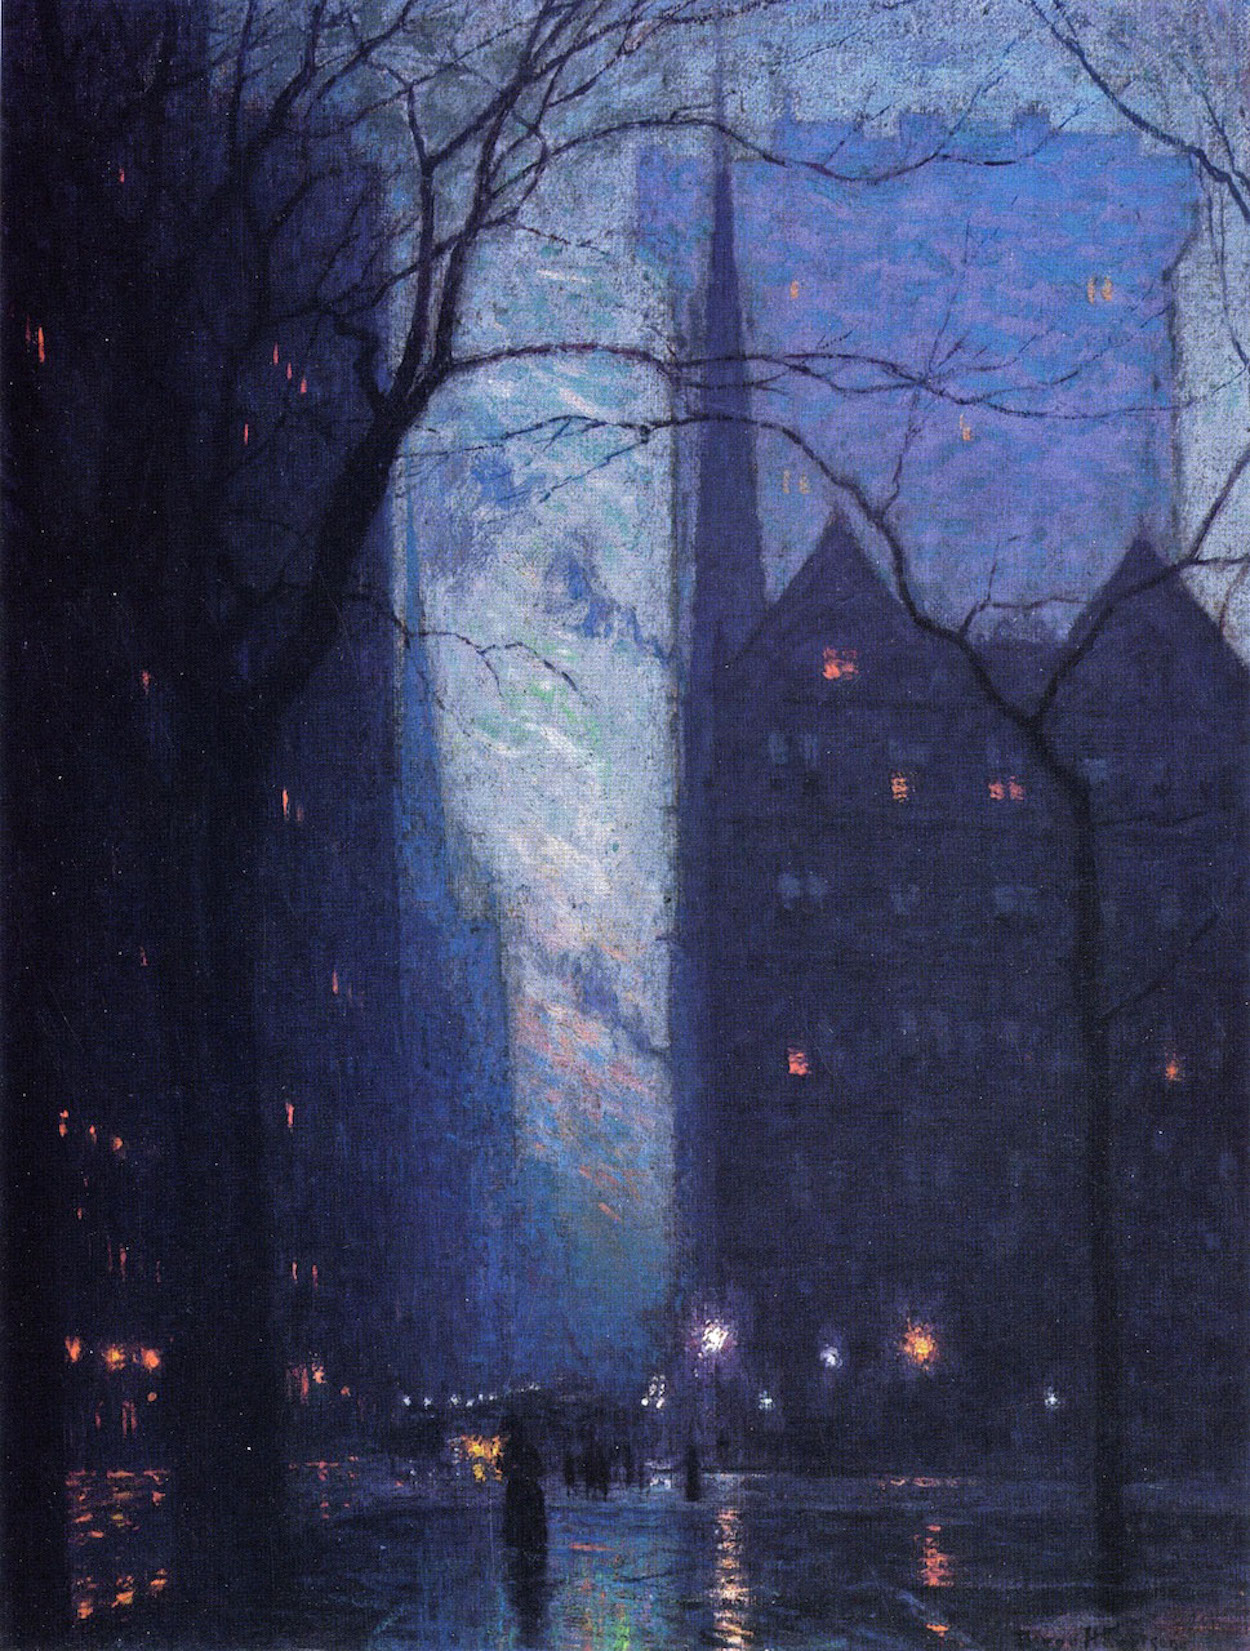 Fifth Avenue at Twilight by Lowell Birge Harrison - circa 1910 - 76.2 x 58.42 cm Detroit Institute of Arts